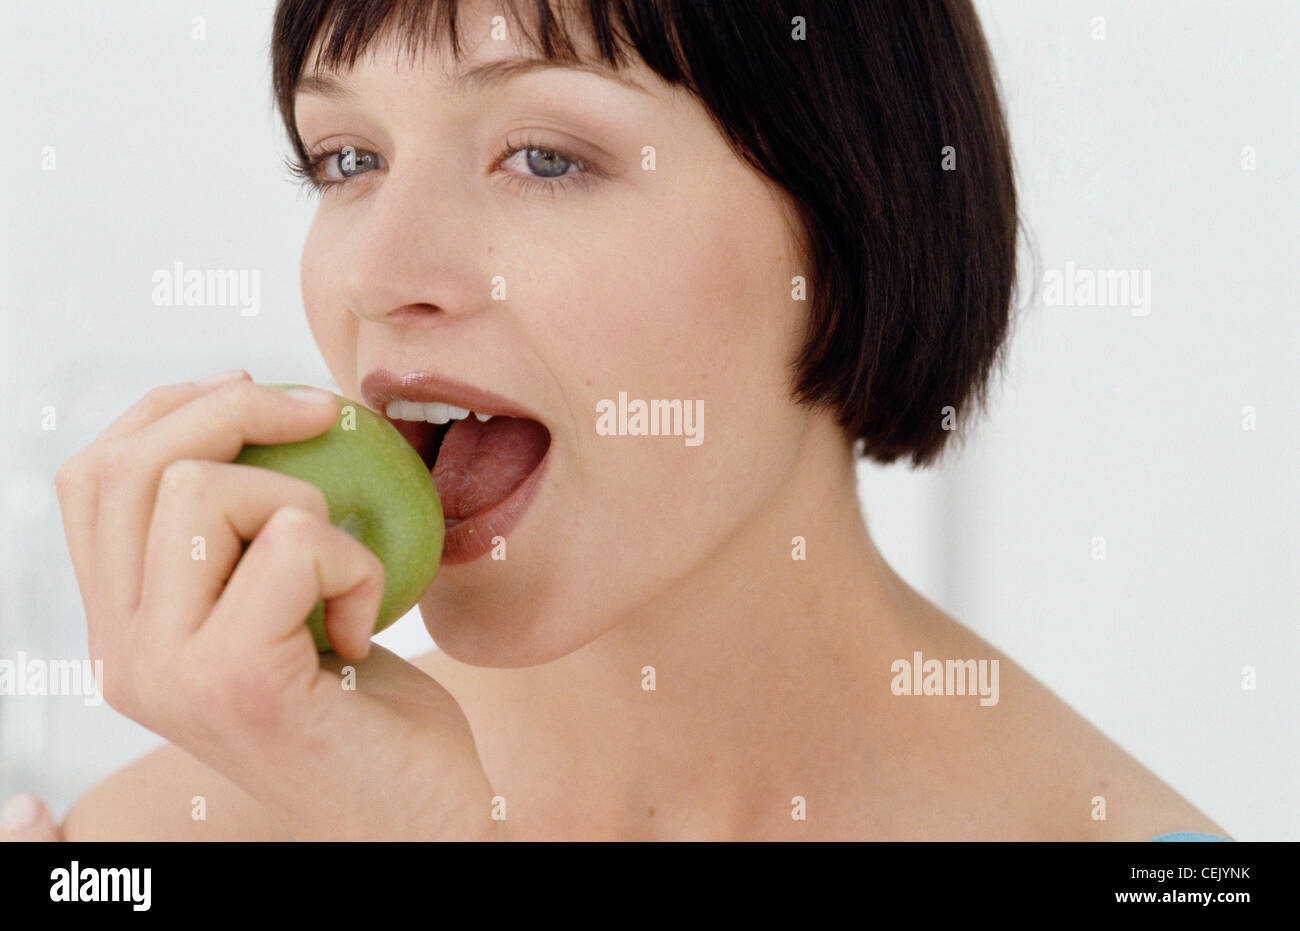 A  Female looking to the left biting a green apple Stock Photo